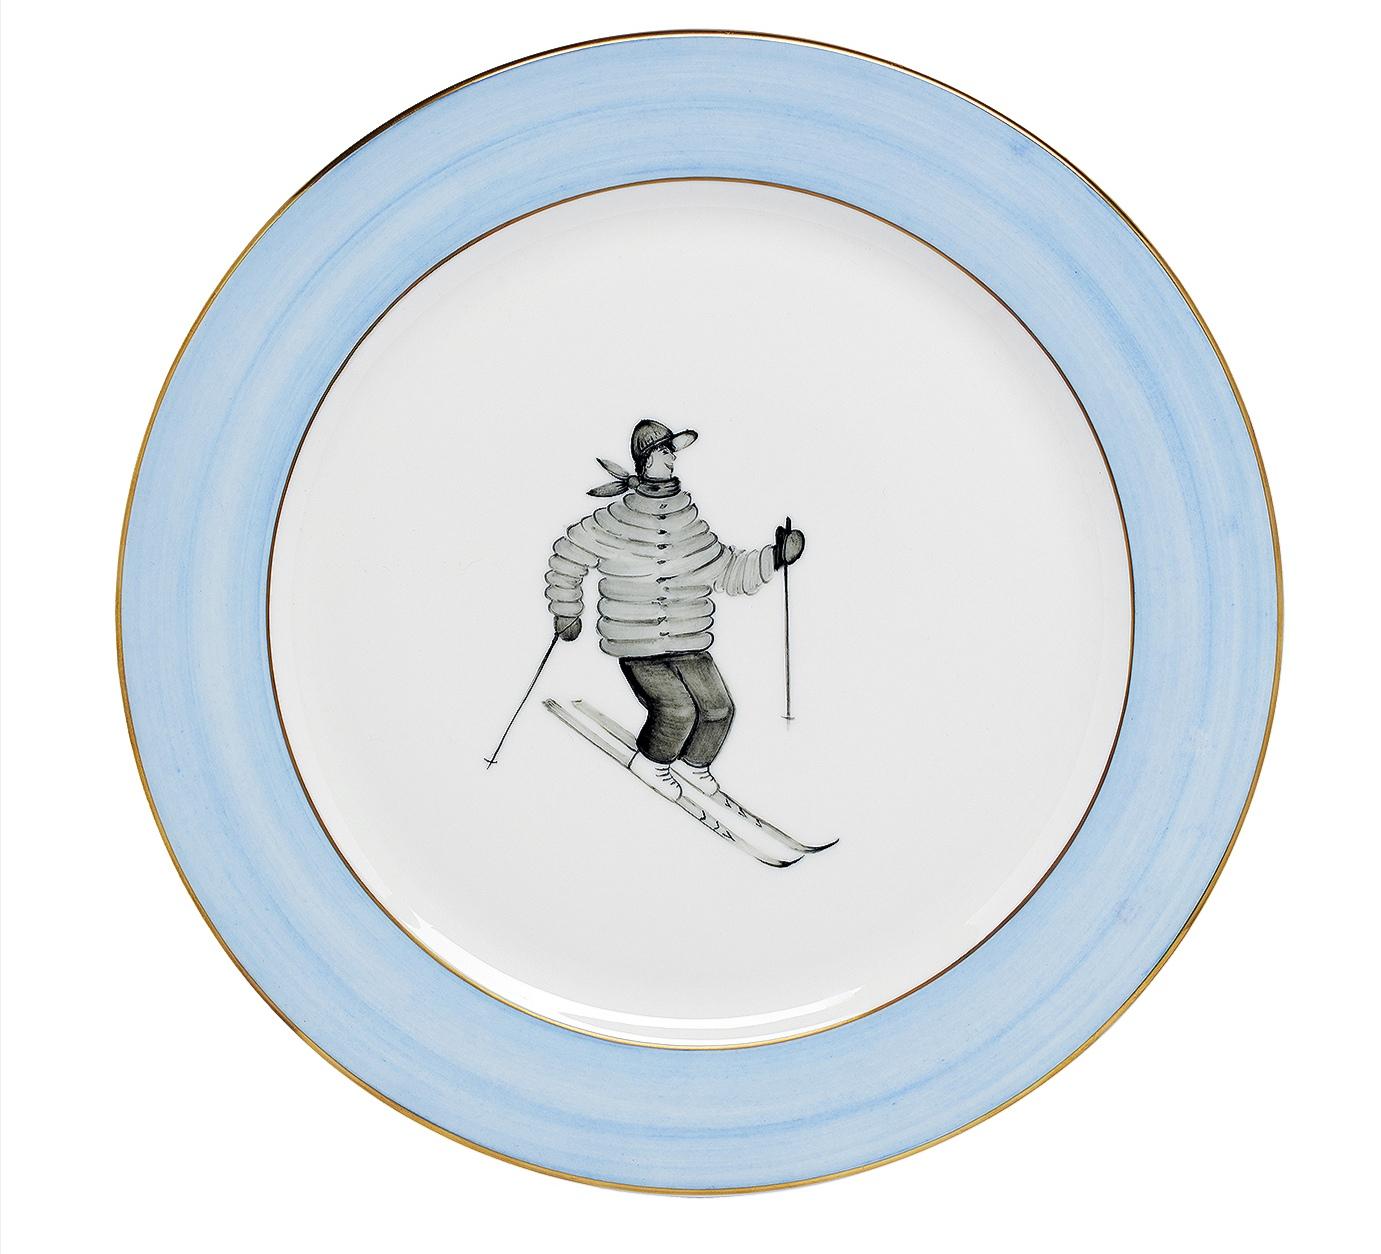 Set of six completely handmade and hand painted underglaze porzelain dishes. The decor shows a country style skier boy with a handsfree blue line and 24-carat gold rimmed. A matching soup plate and breakfast plate can be ordered in addition.
The